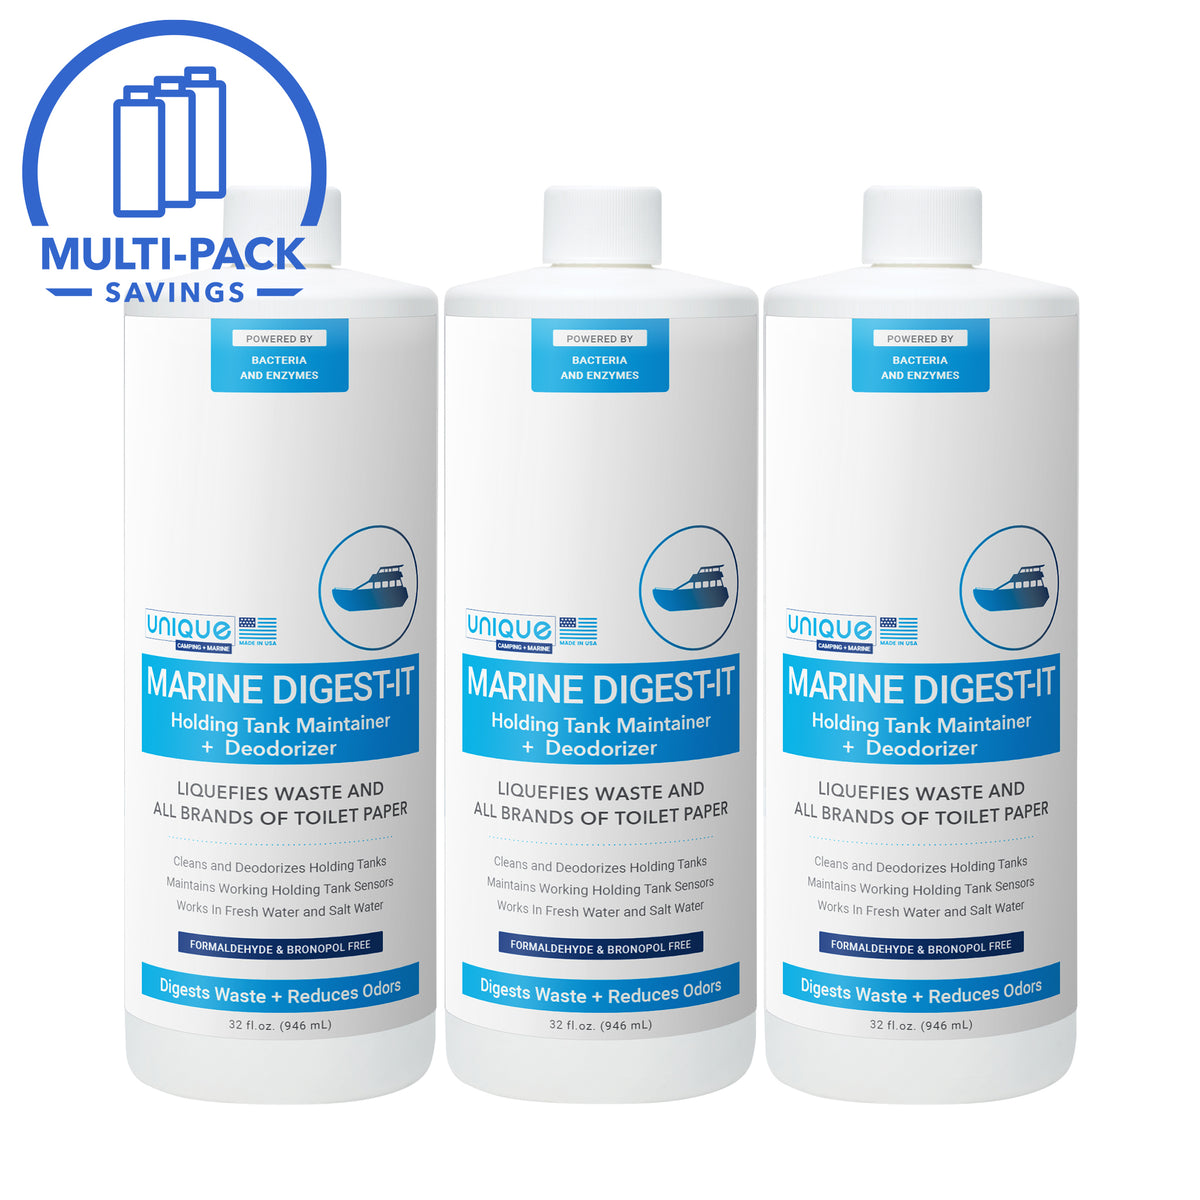 Marine Digest-It 3 Pack of 32 oz. Uses powerful waste digesting microbes to break down waste in your boats holding tank. Prevent odors and clogs by using Marine Digest-It in your boat. - Unique Camping + Marine